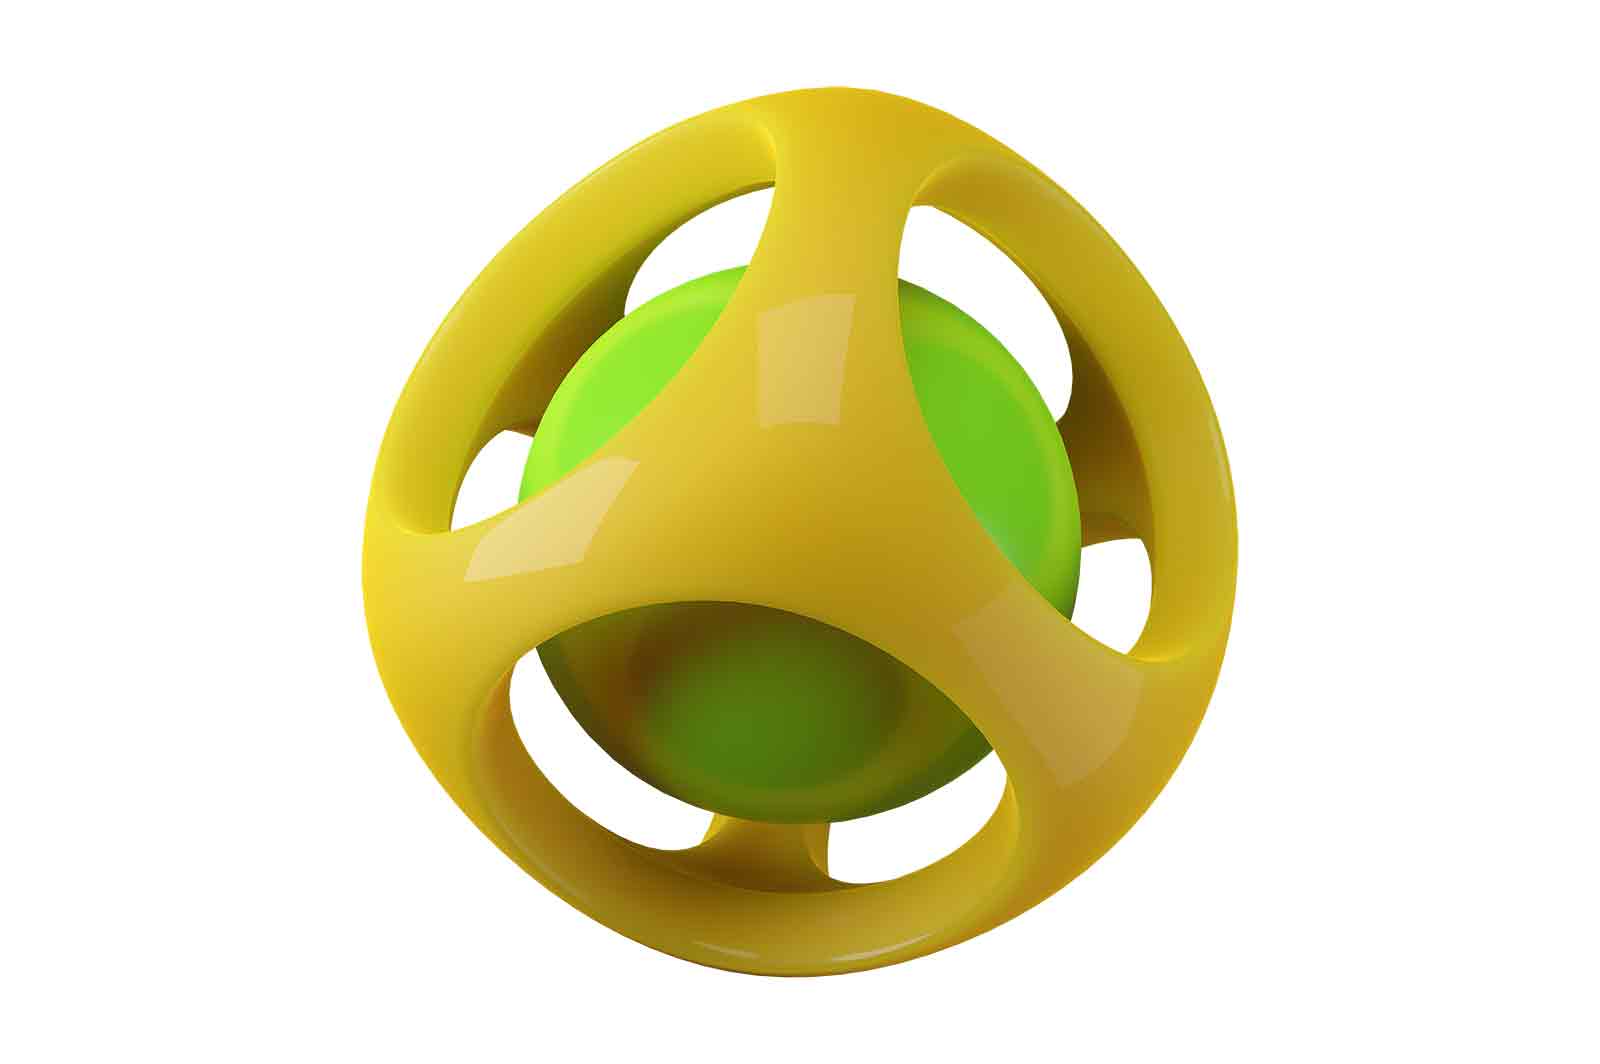 Abstract green sphere inside of yellow frame with holes 3d rendered illustration. Component of mechanism concept